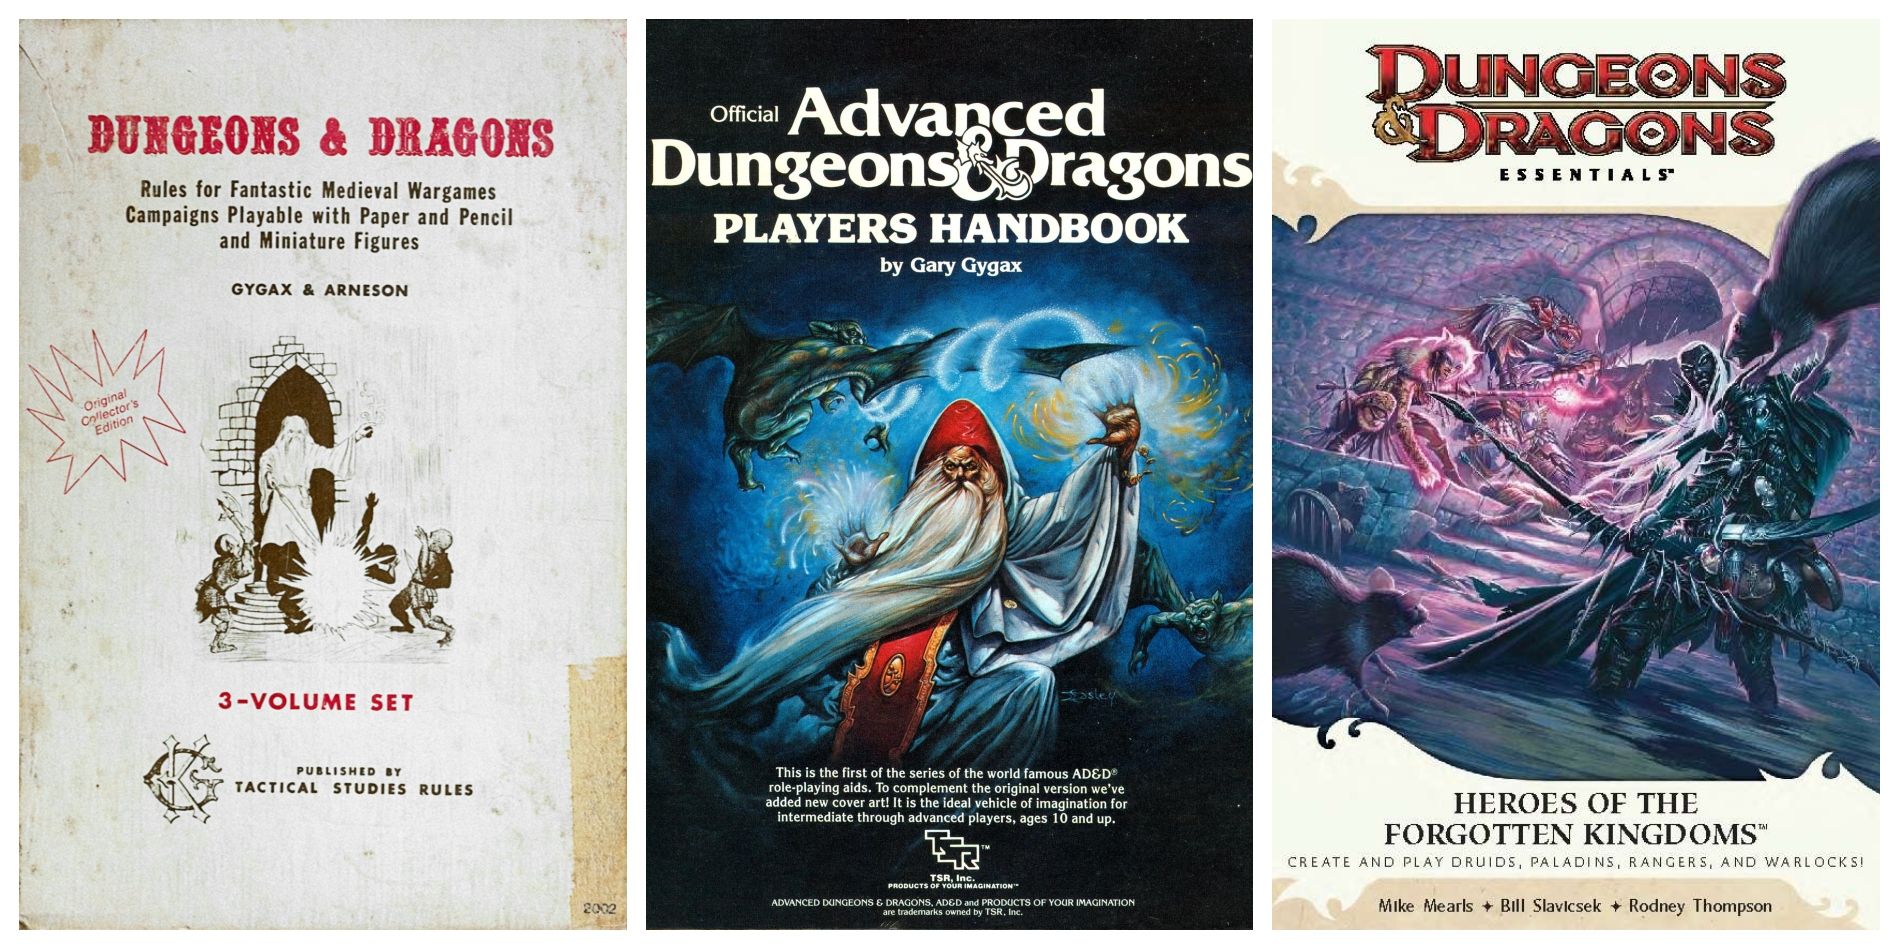 Every Dungeons & Dragons Edition (And How They're Different) - ODnD Advanced DnD and 4e DnD covers